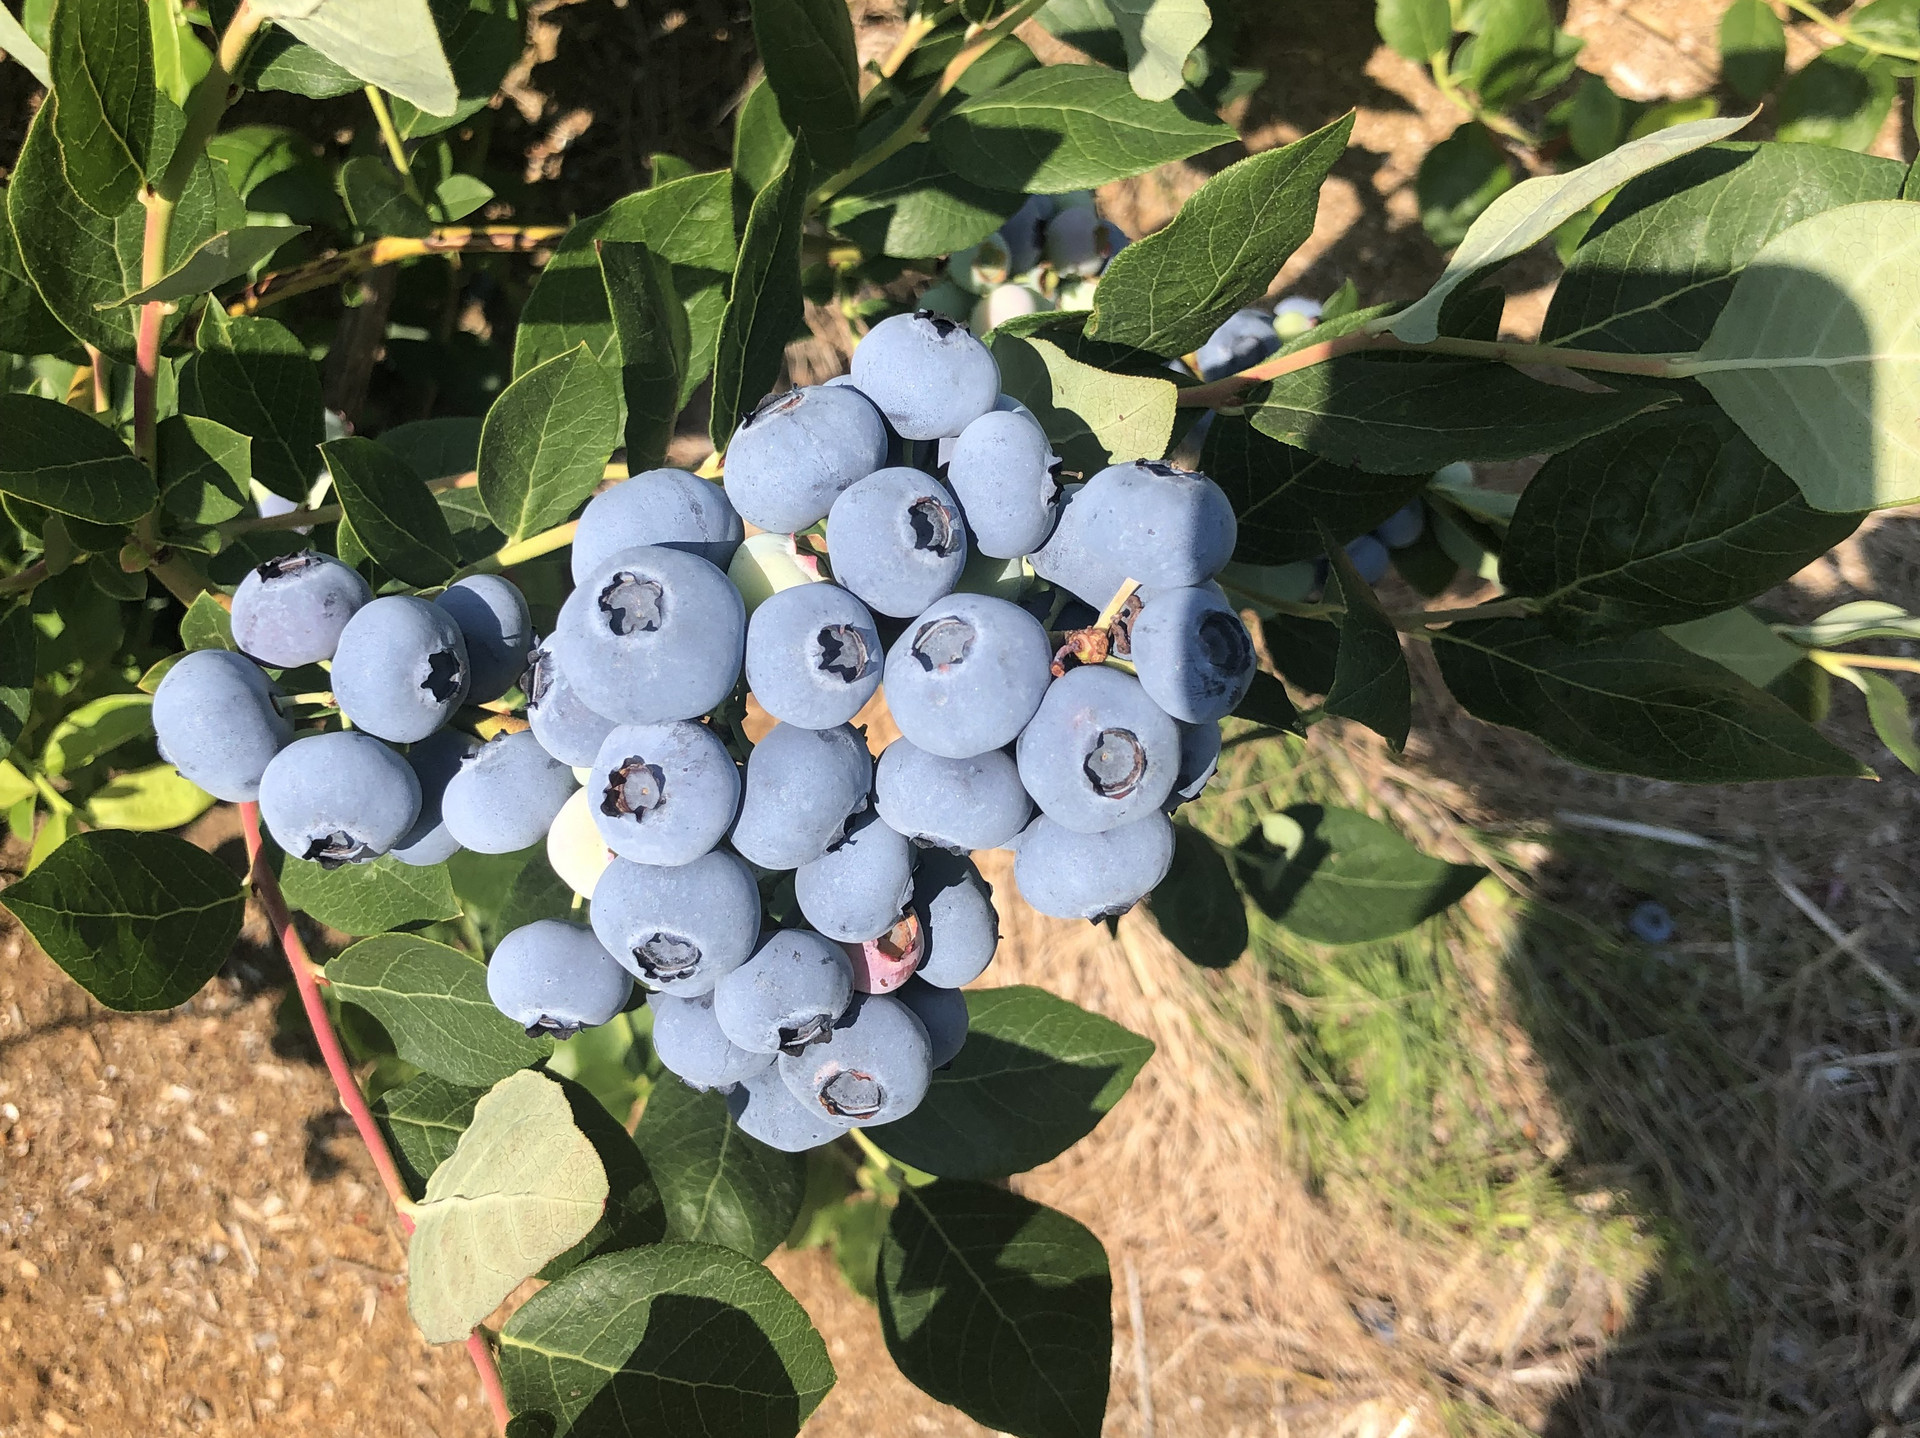 Blueberries grown as part of the regenerative farming project